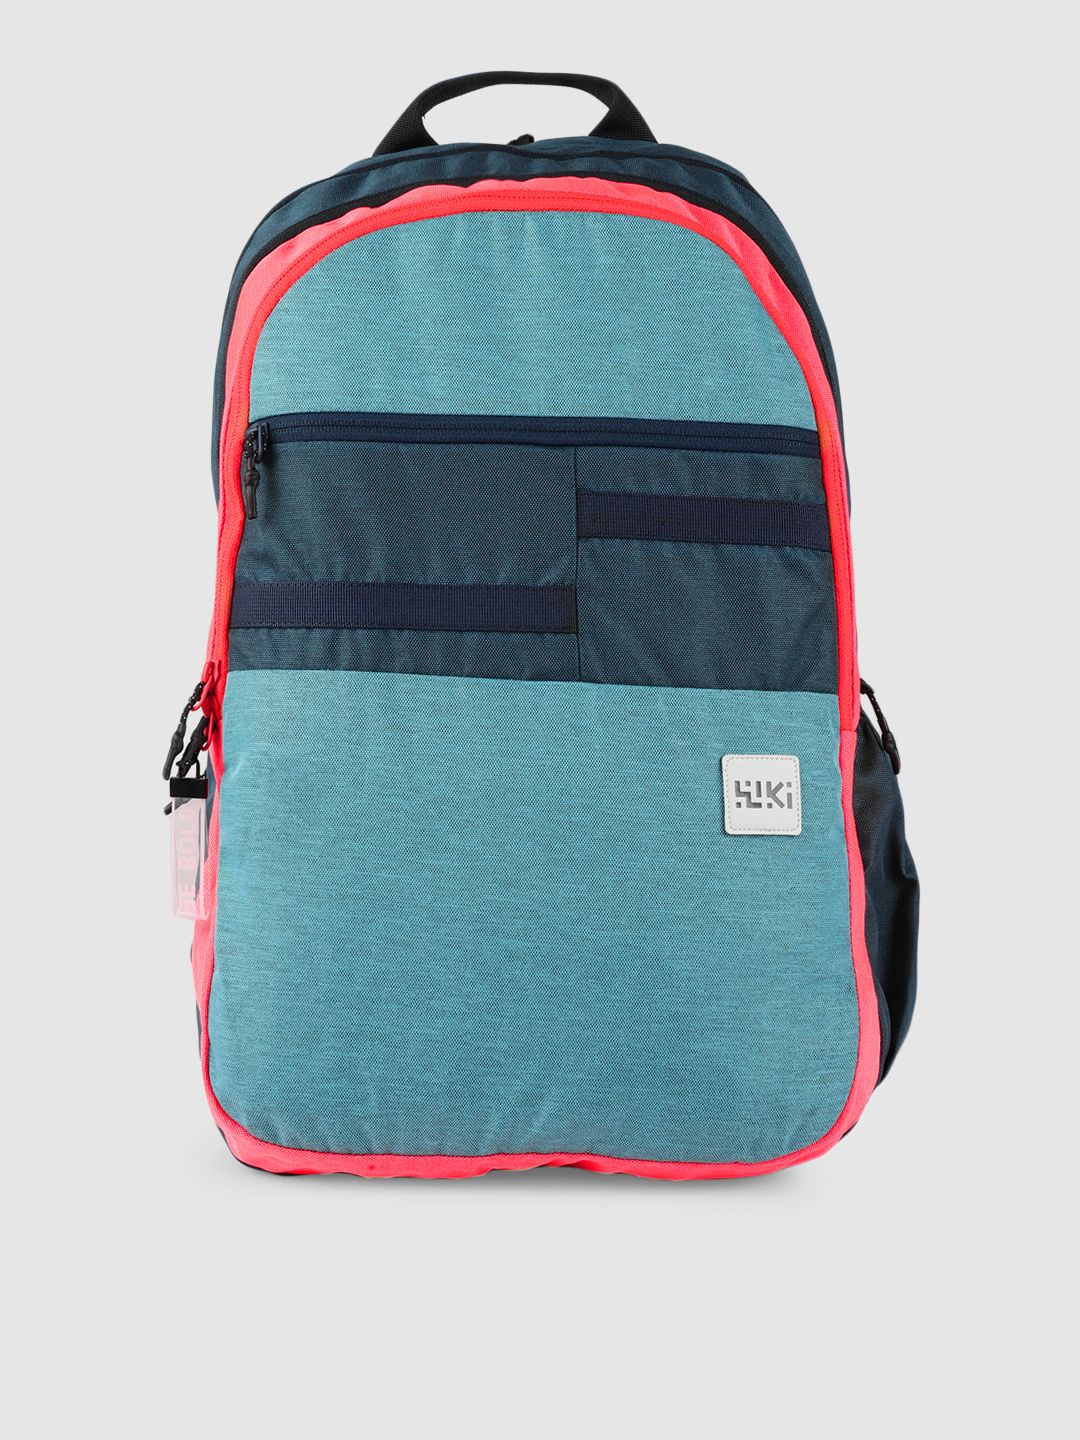 Wildcraft Unisex Blue & Green Colourblocked Backpack Price in India